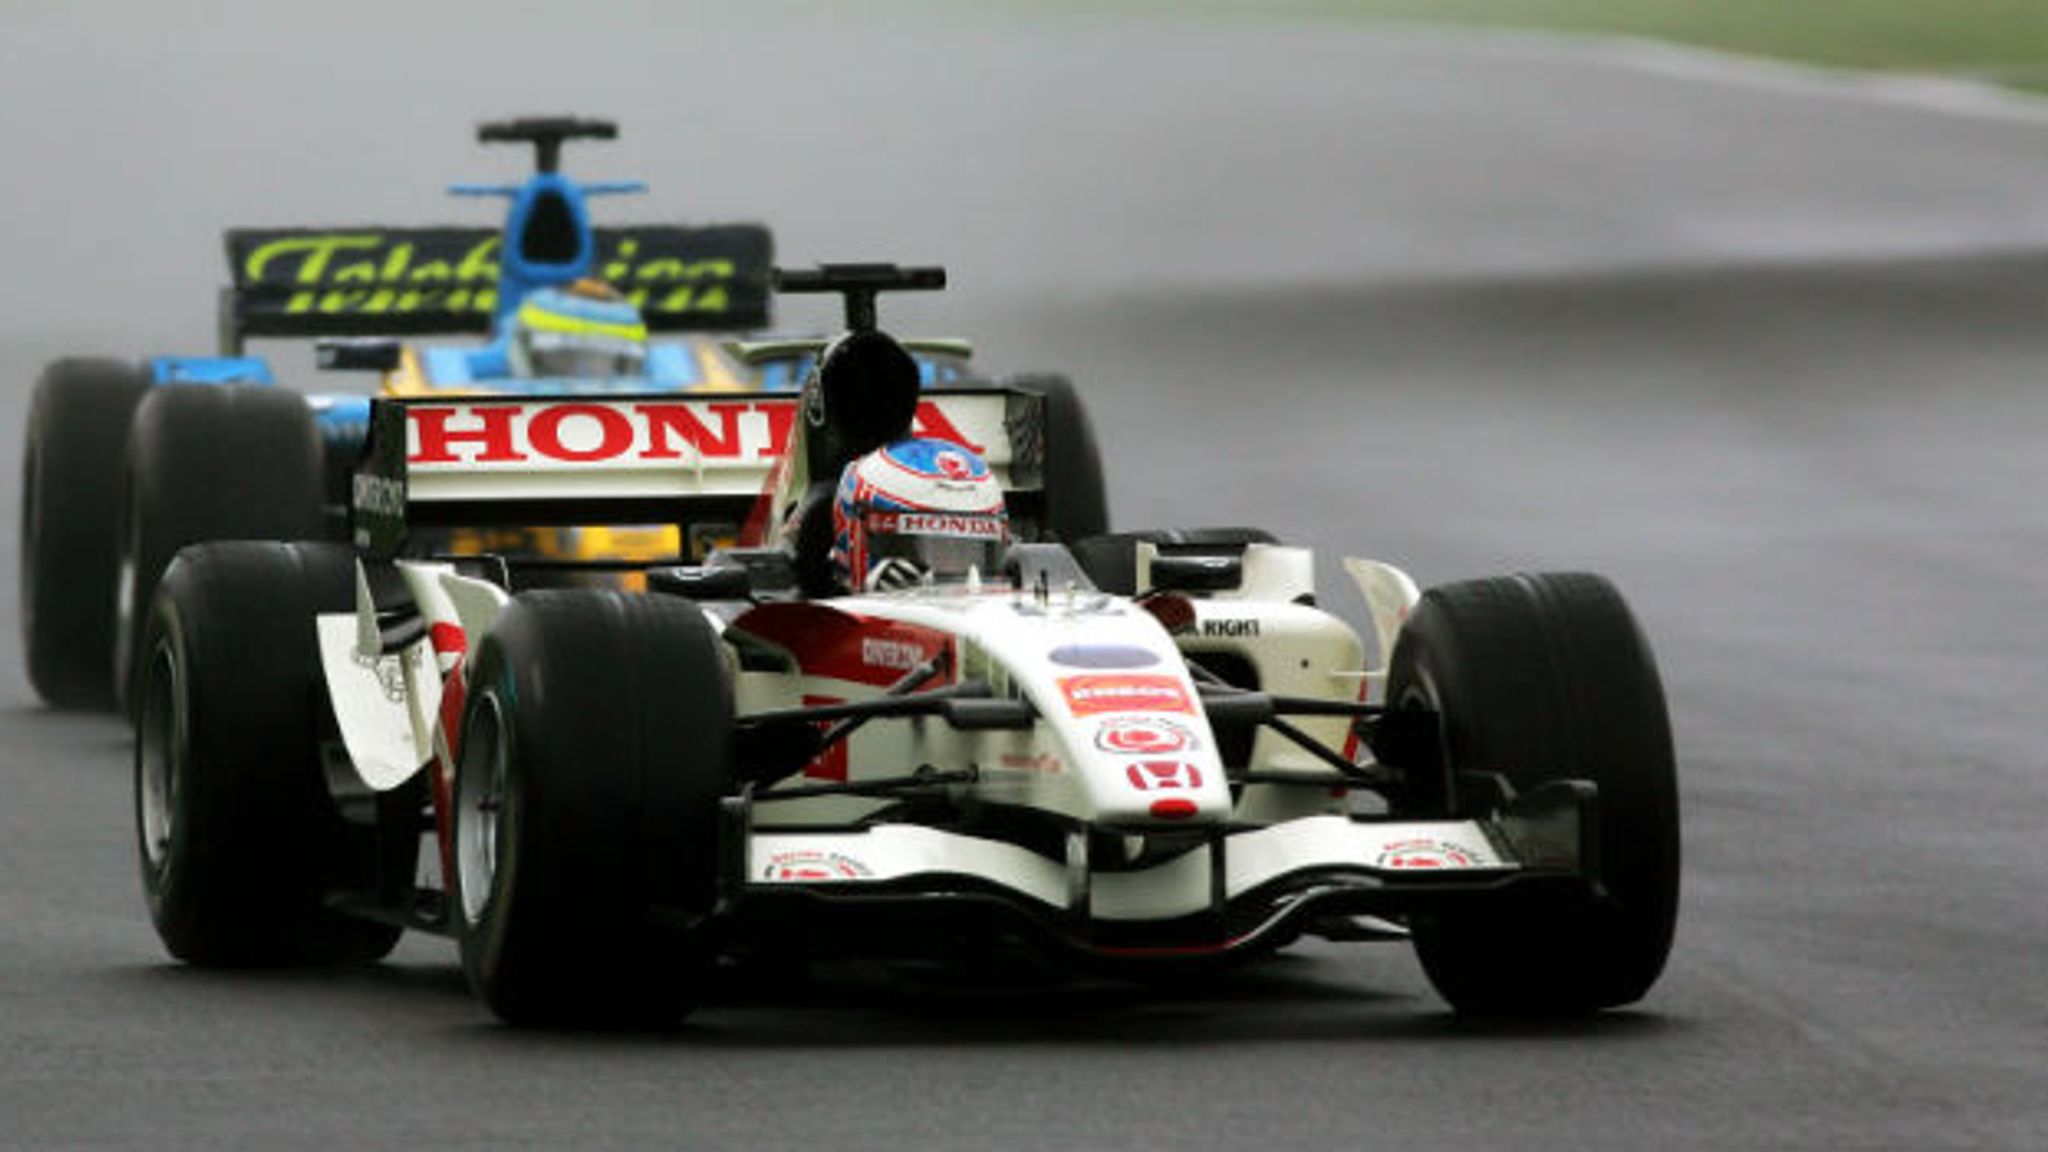 Honda R D Chief Suggests Car Giant Will Look To Return To F1 In Future F1 News